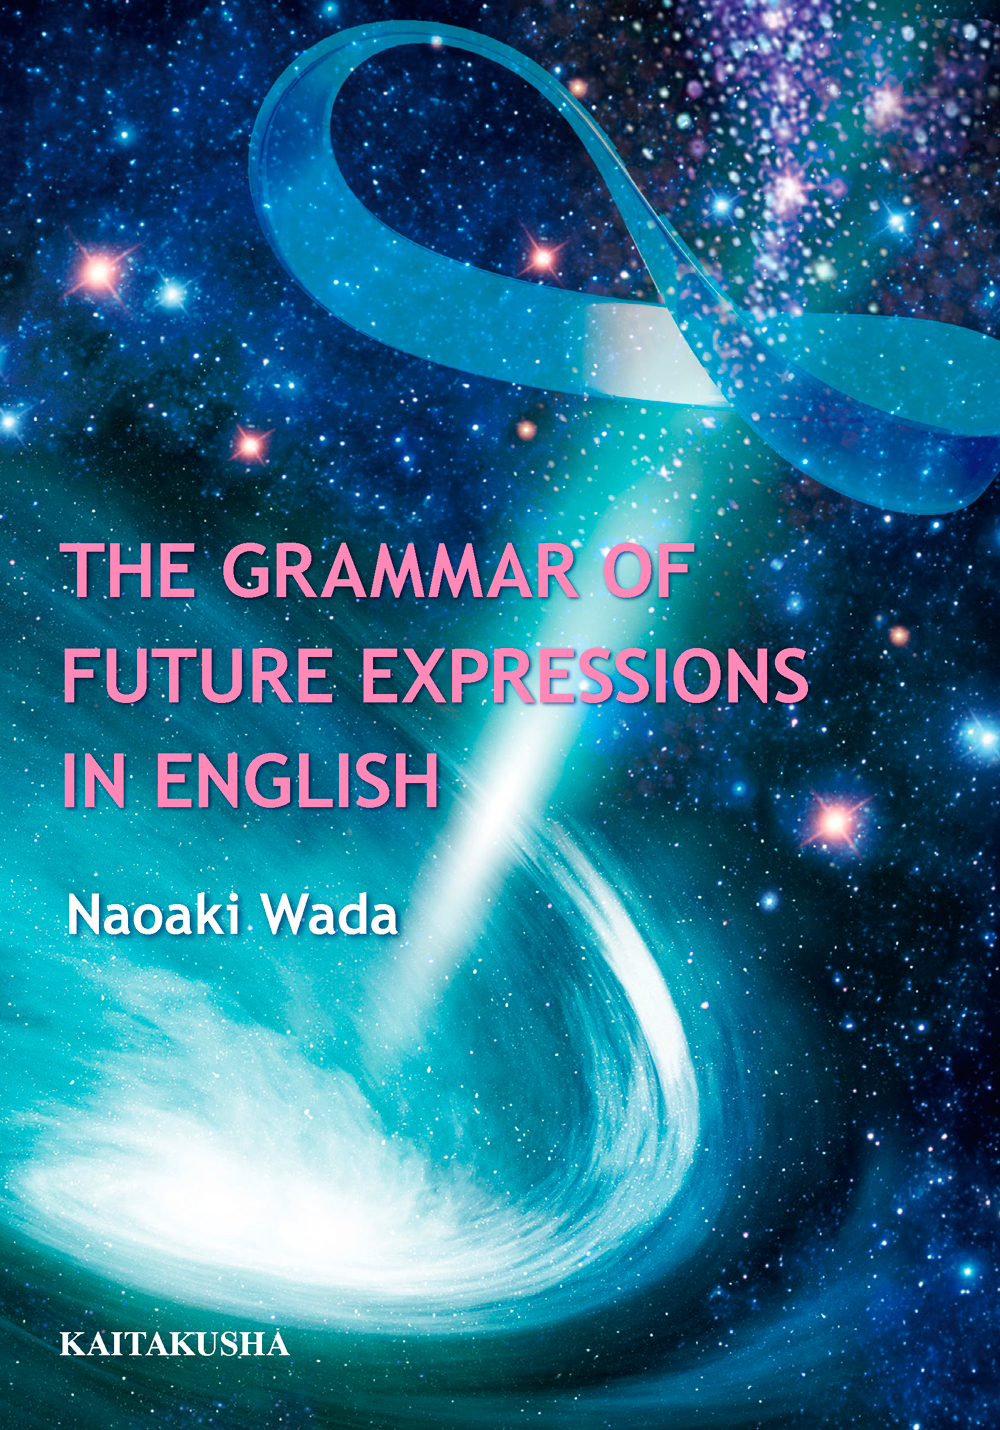 The Grammar of Future Expressions in Englishの商品画像